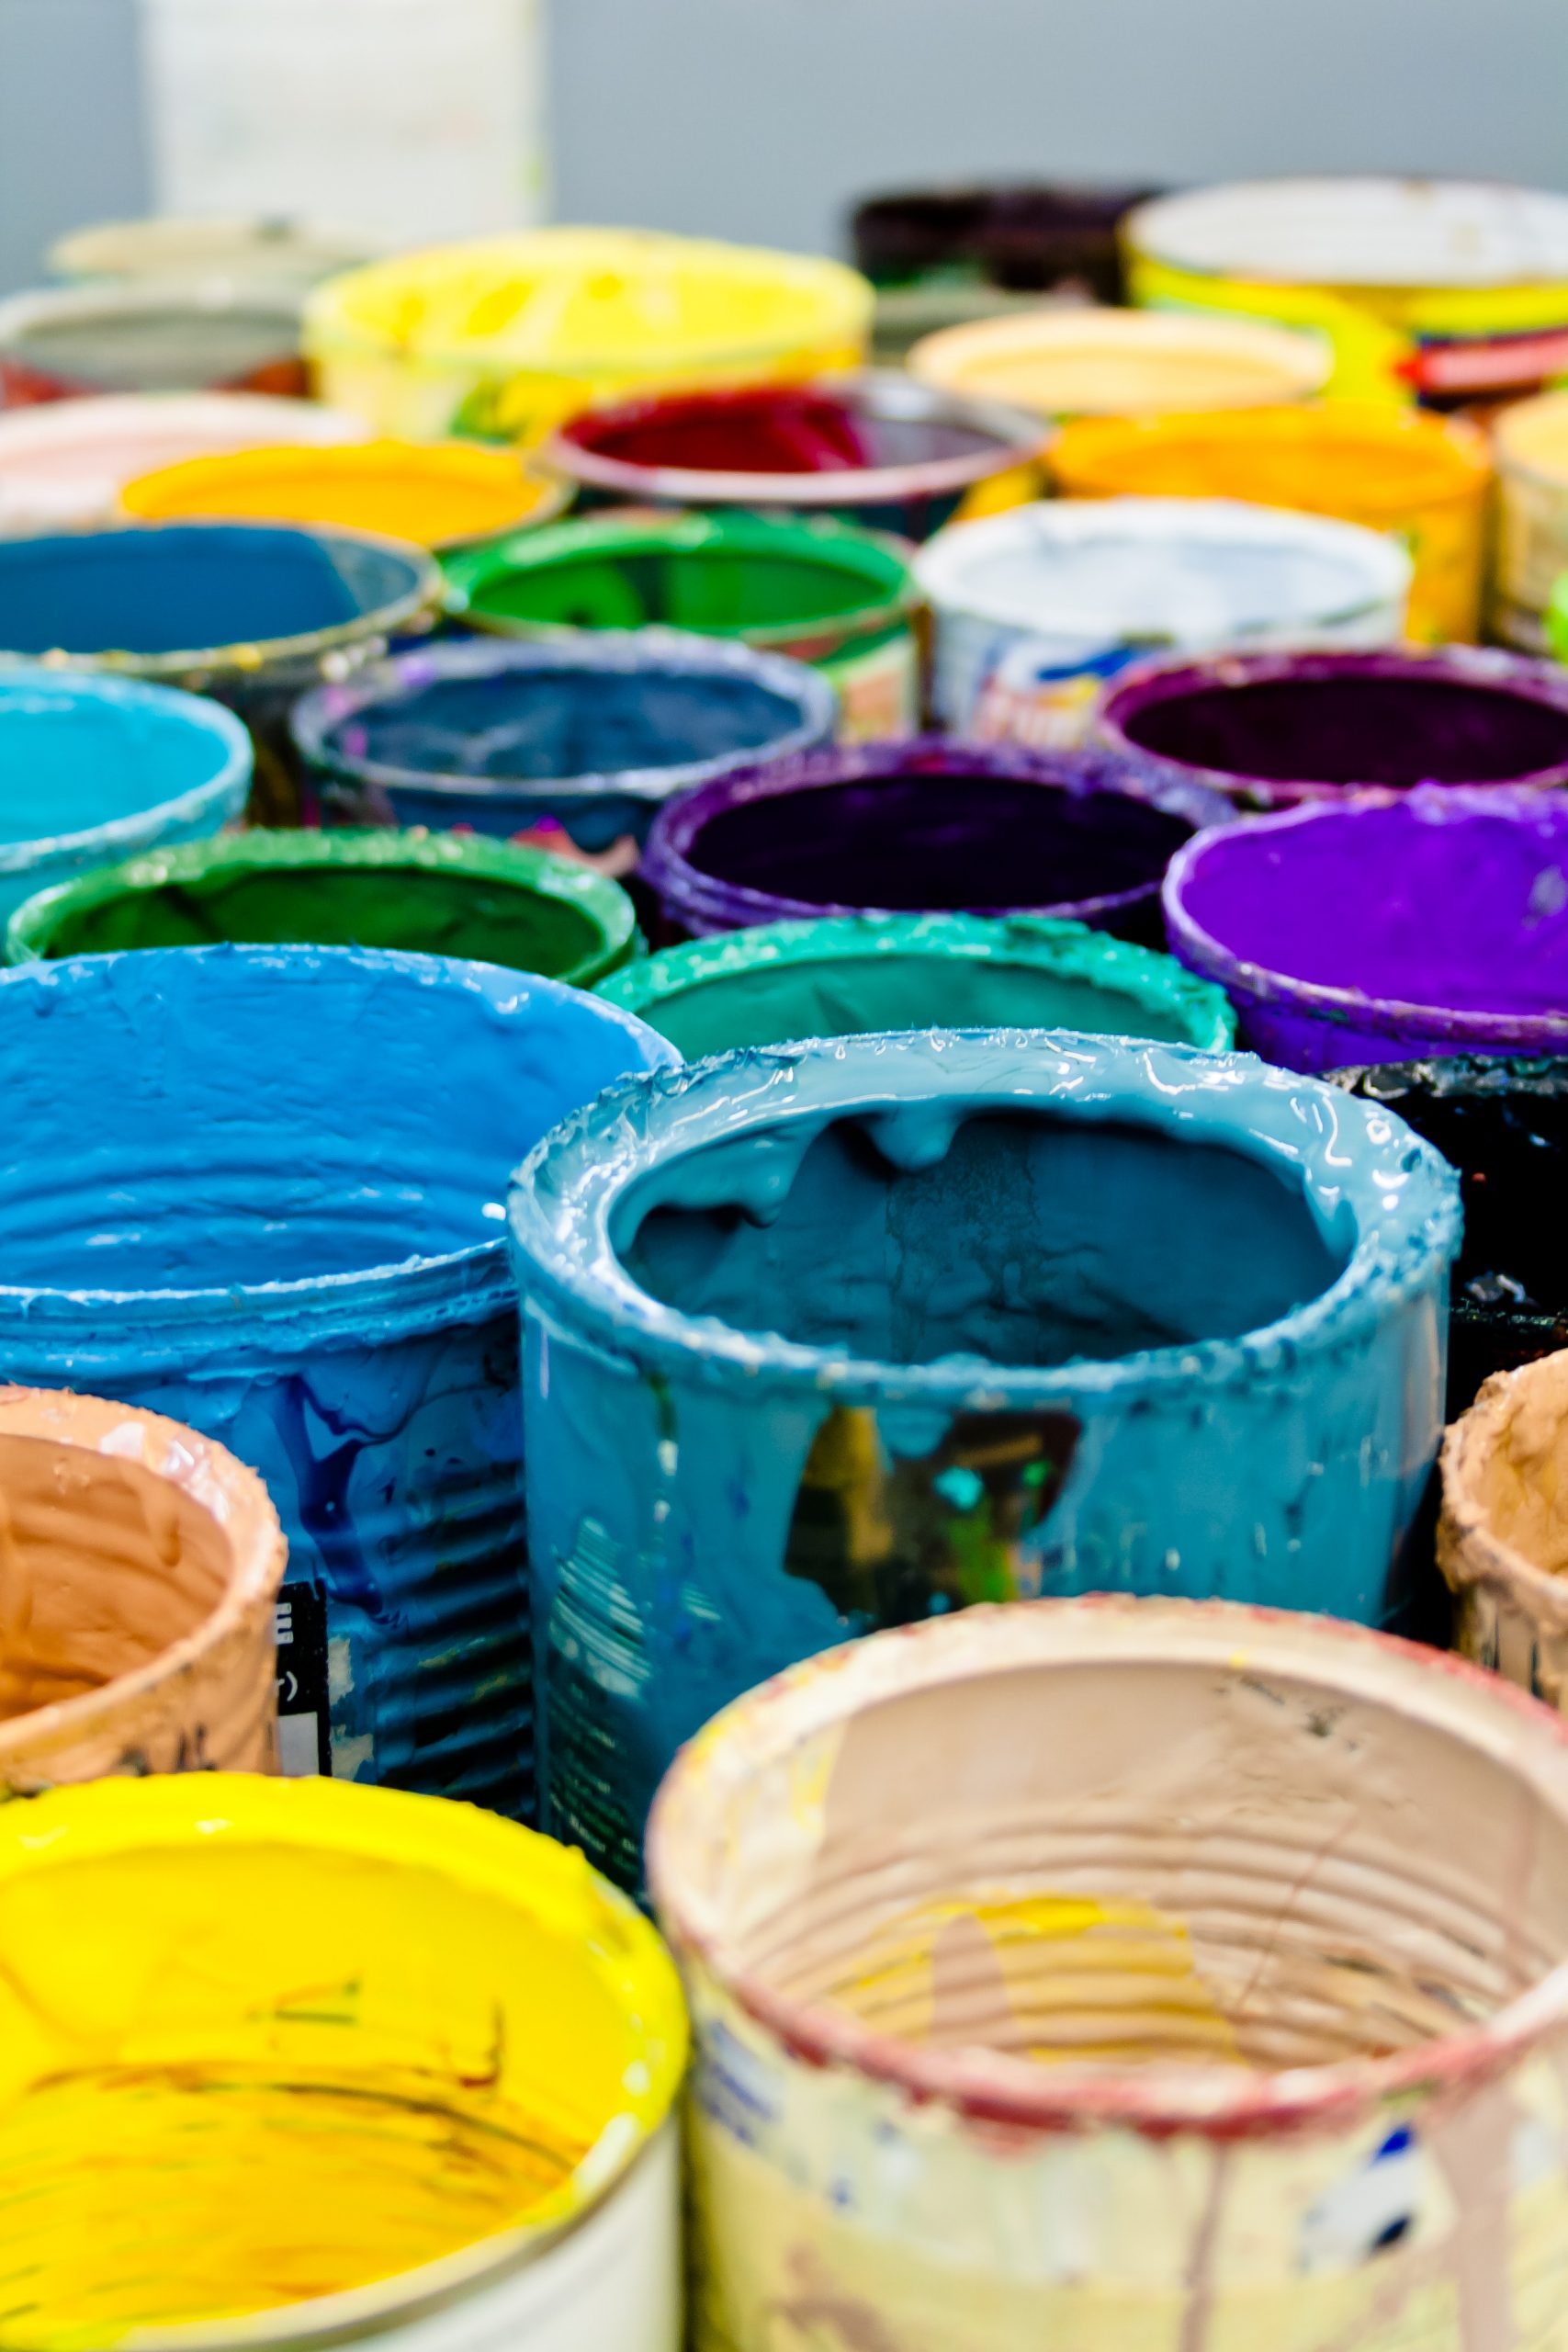 dried paint cans